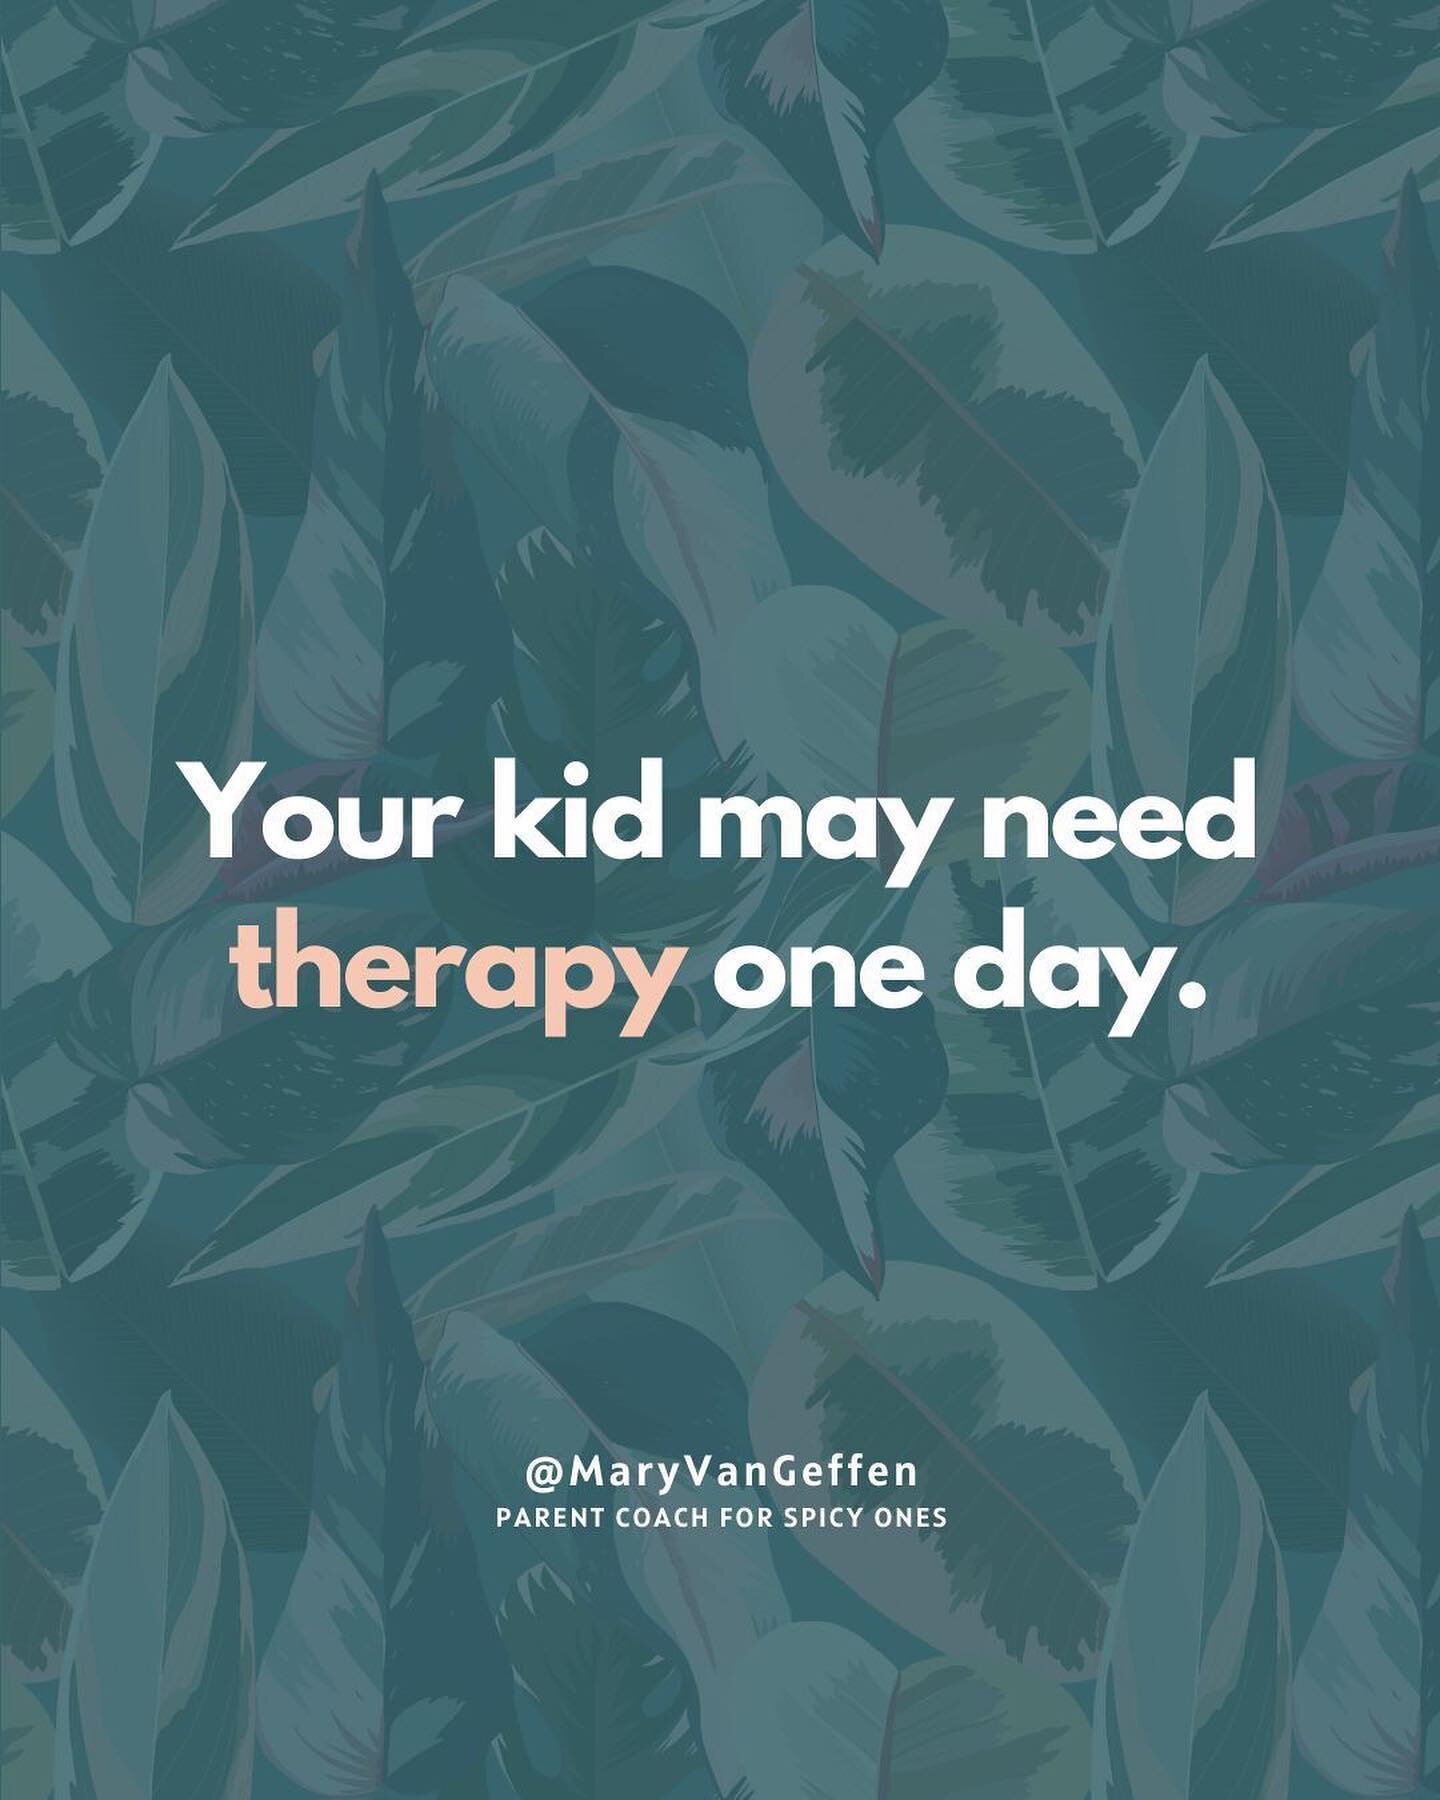 Every child - especially the Spicy Ones - will have complaints at the end. And every parent - especially the Spicy Ones - will have regrets. 

Childhood baggage is pretty much inevitable, even if you are a fantastic parent.

All children will have gr